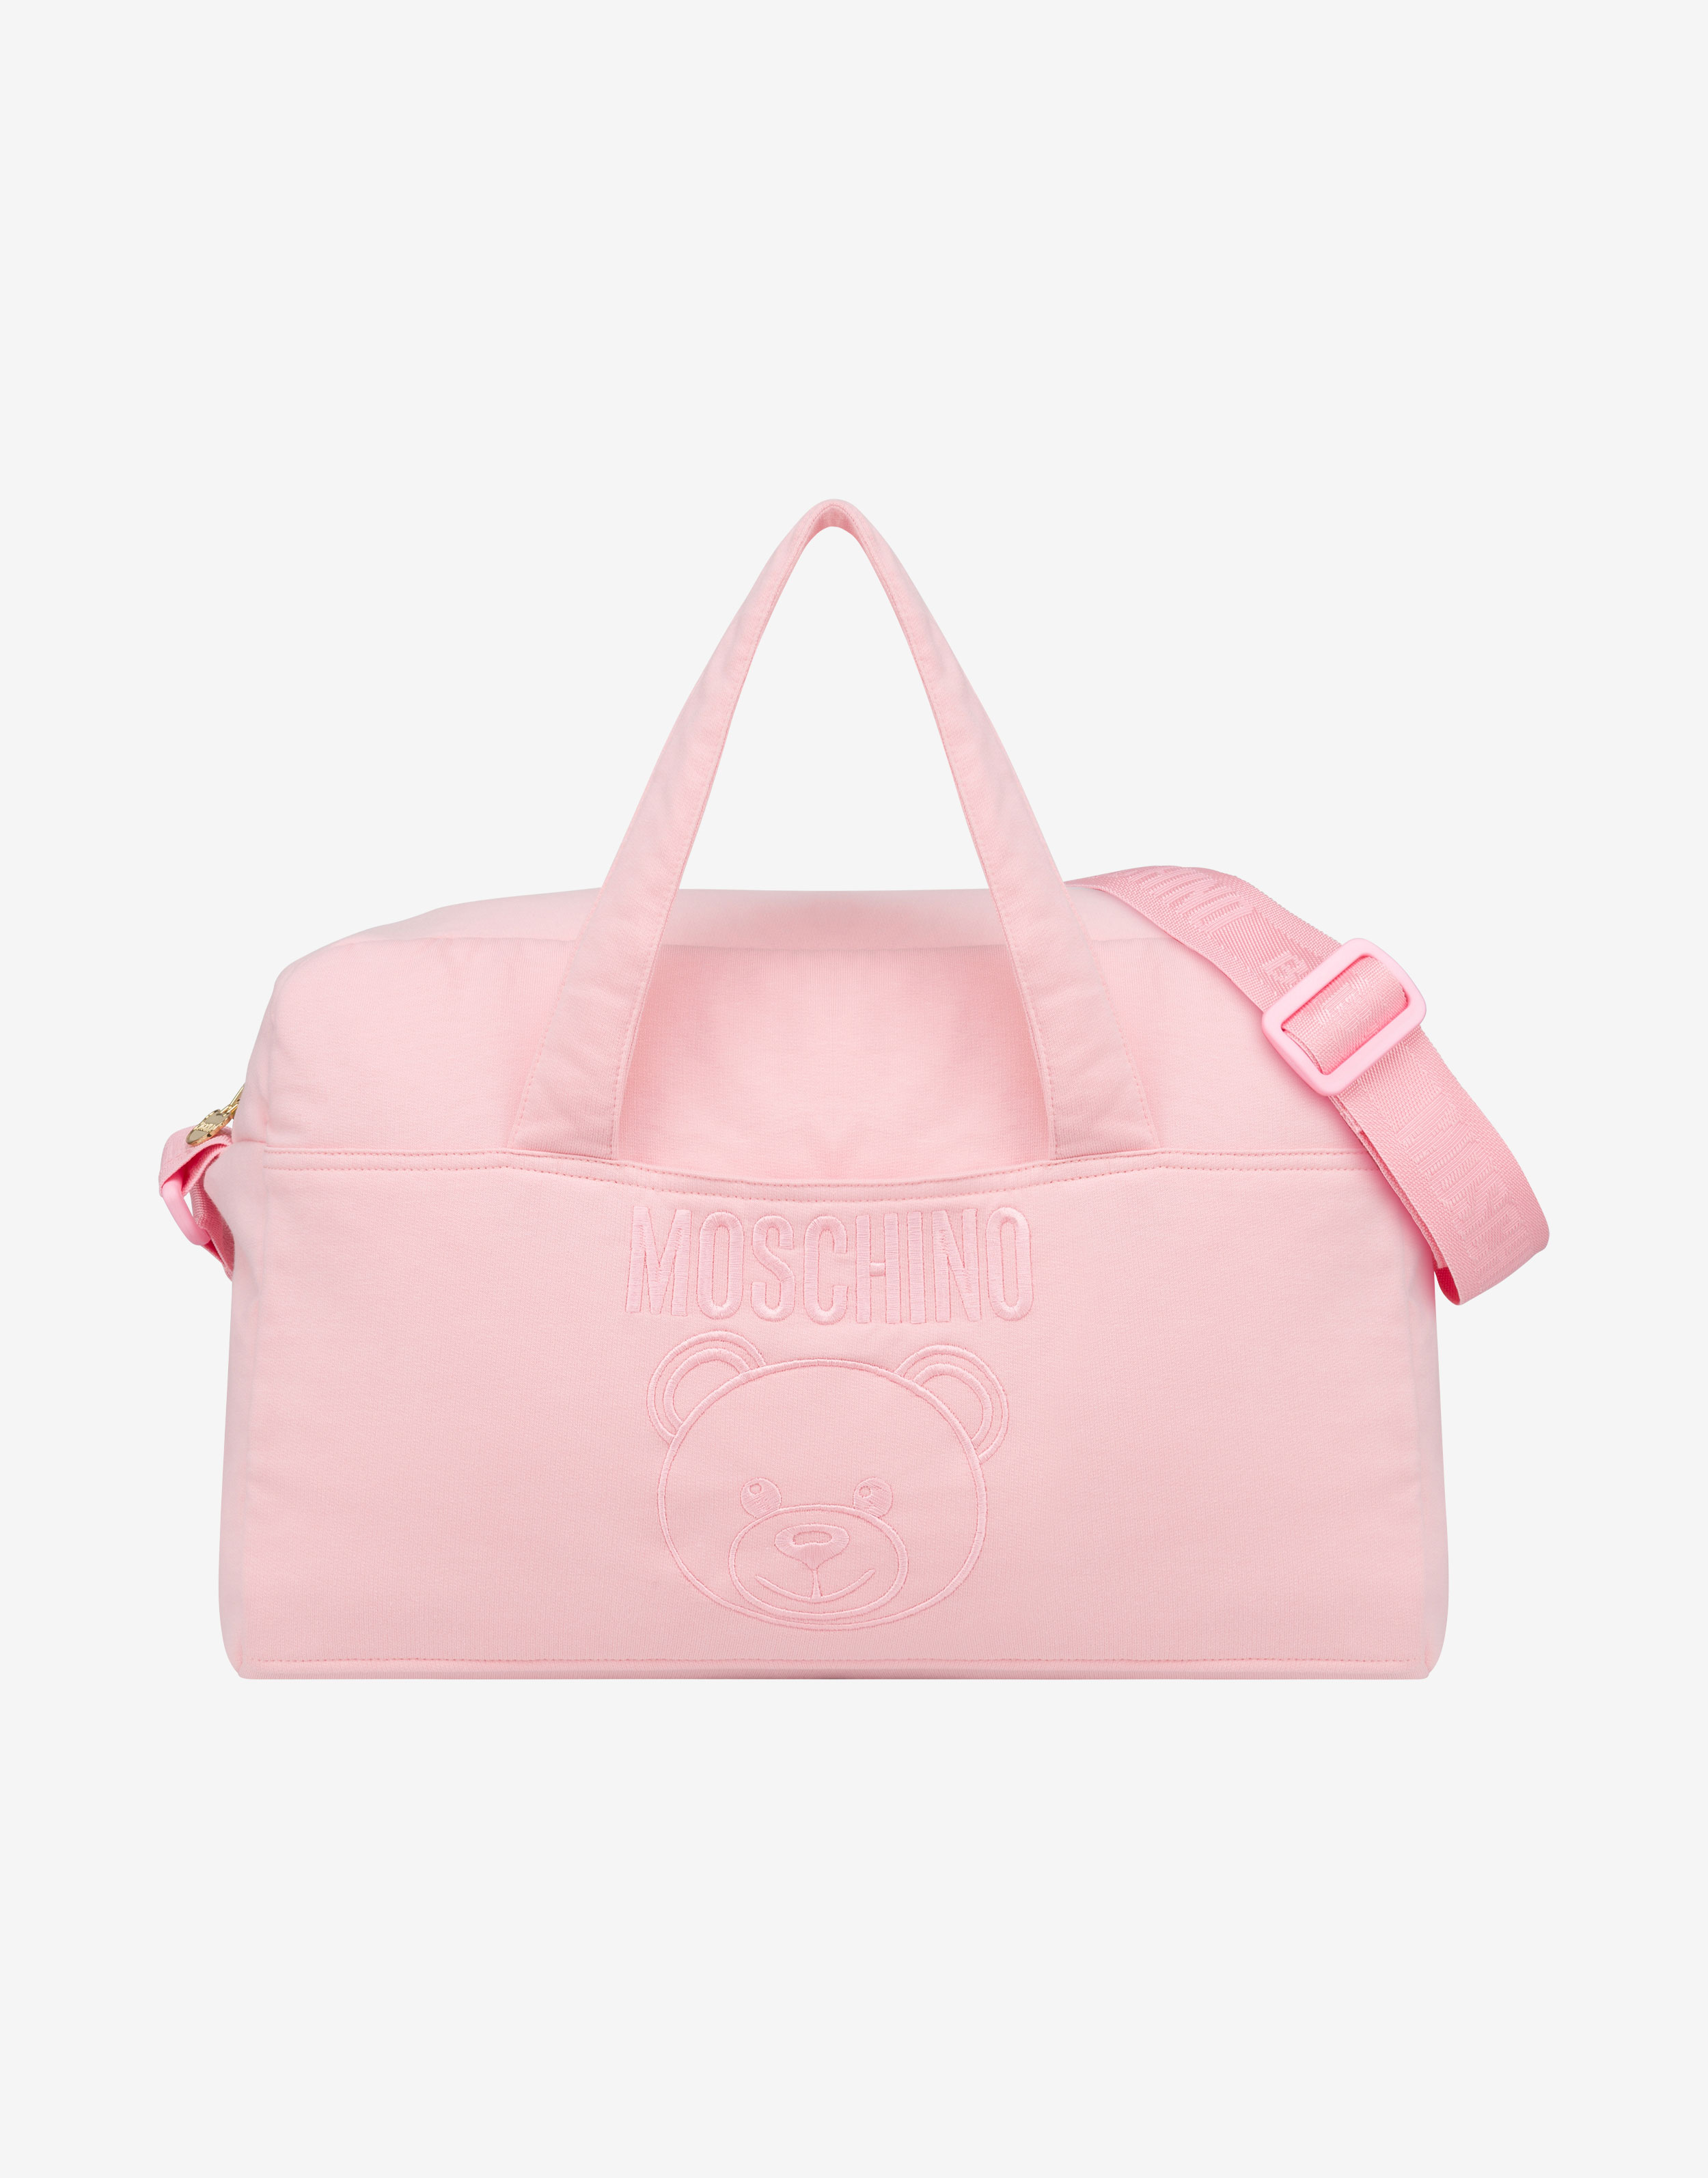 Moschino Baby Accessories for Child - Official Store